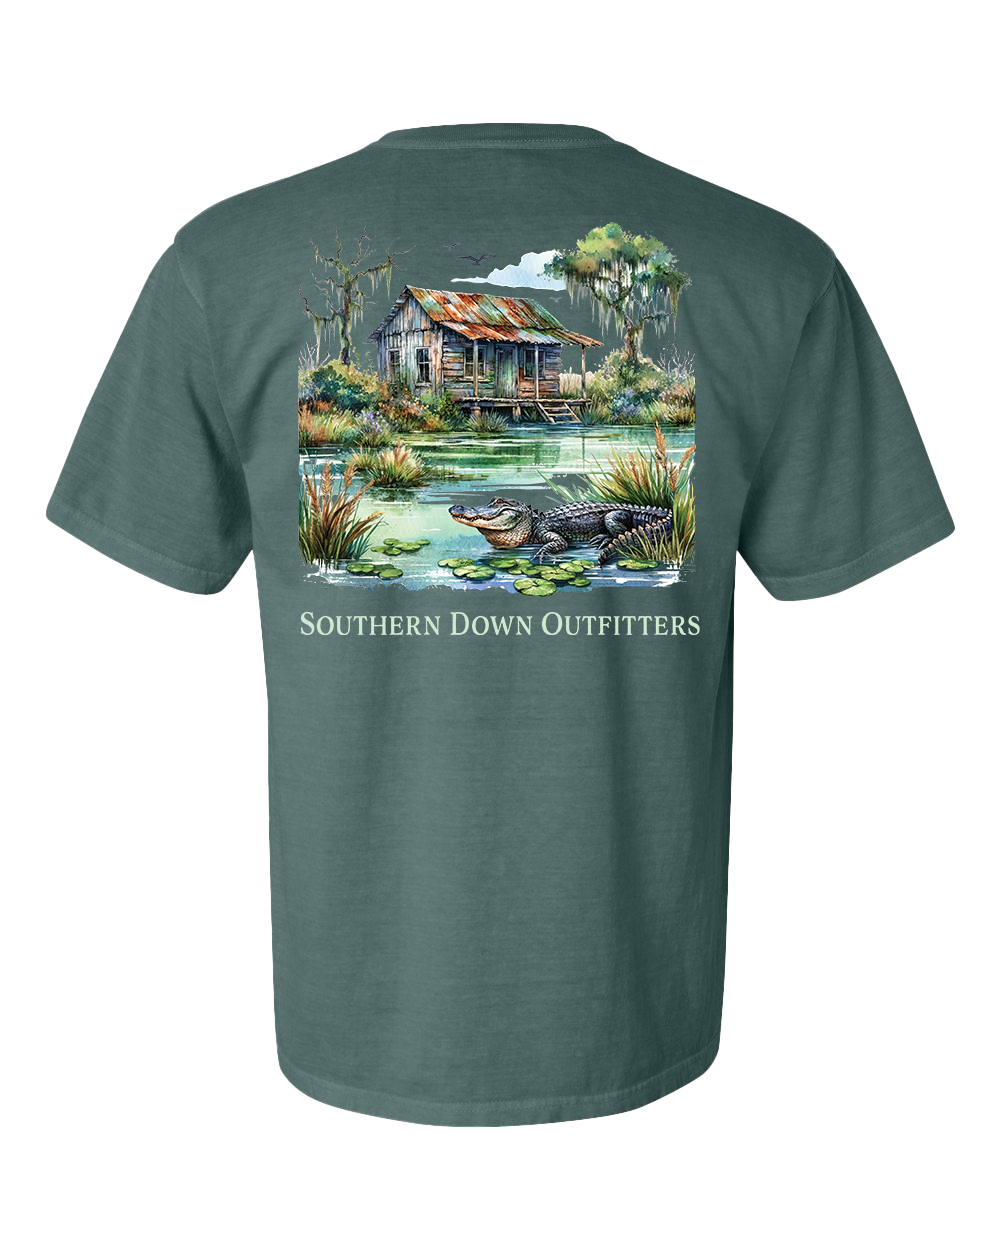 Swamp Shack Tee – Southern Down Outfitters